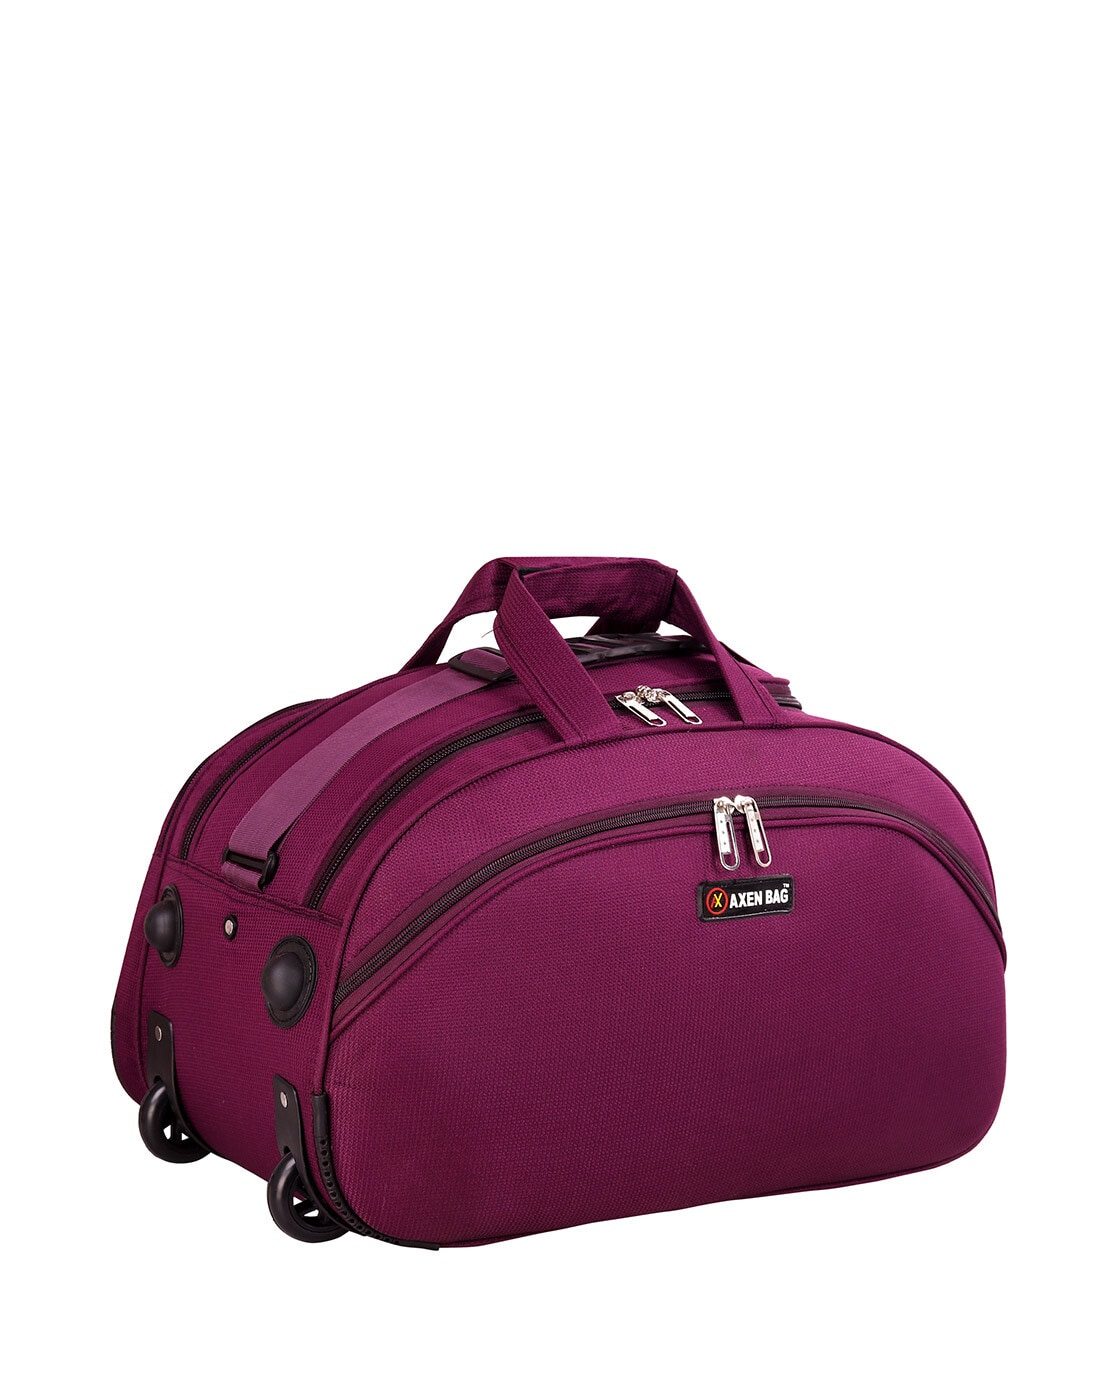 Purchase Wholesale western duffle bag. Free Returns & Net 60 Terms on Faire